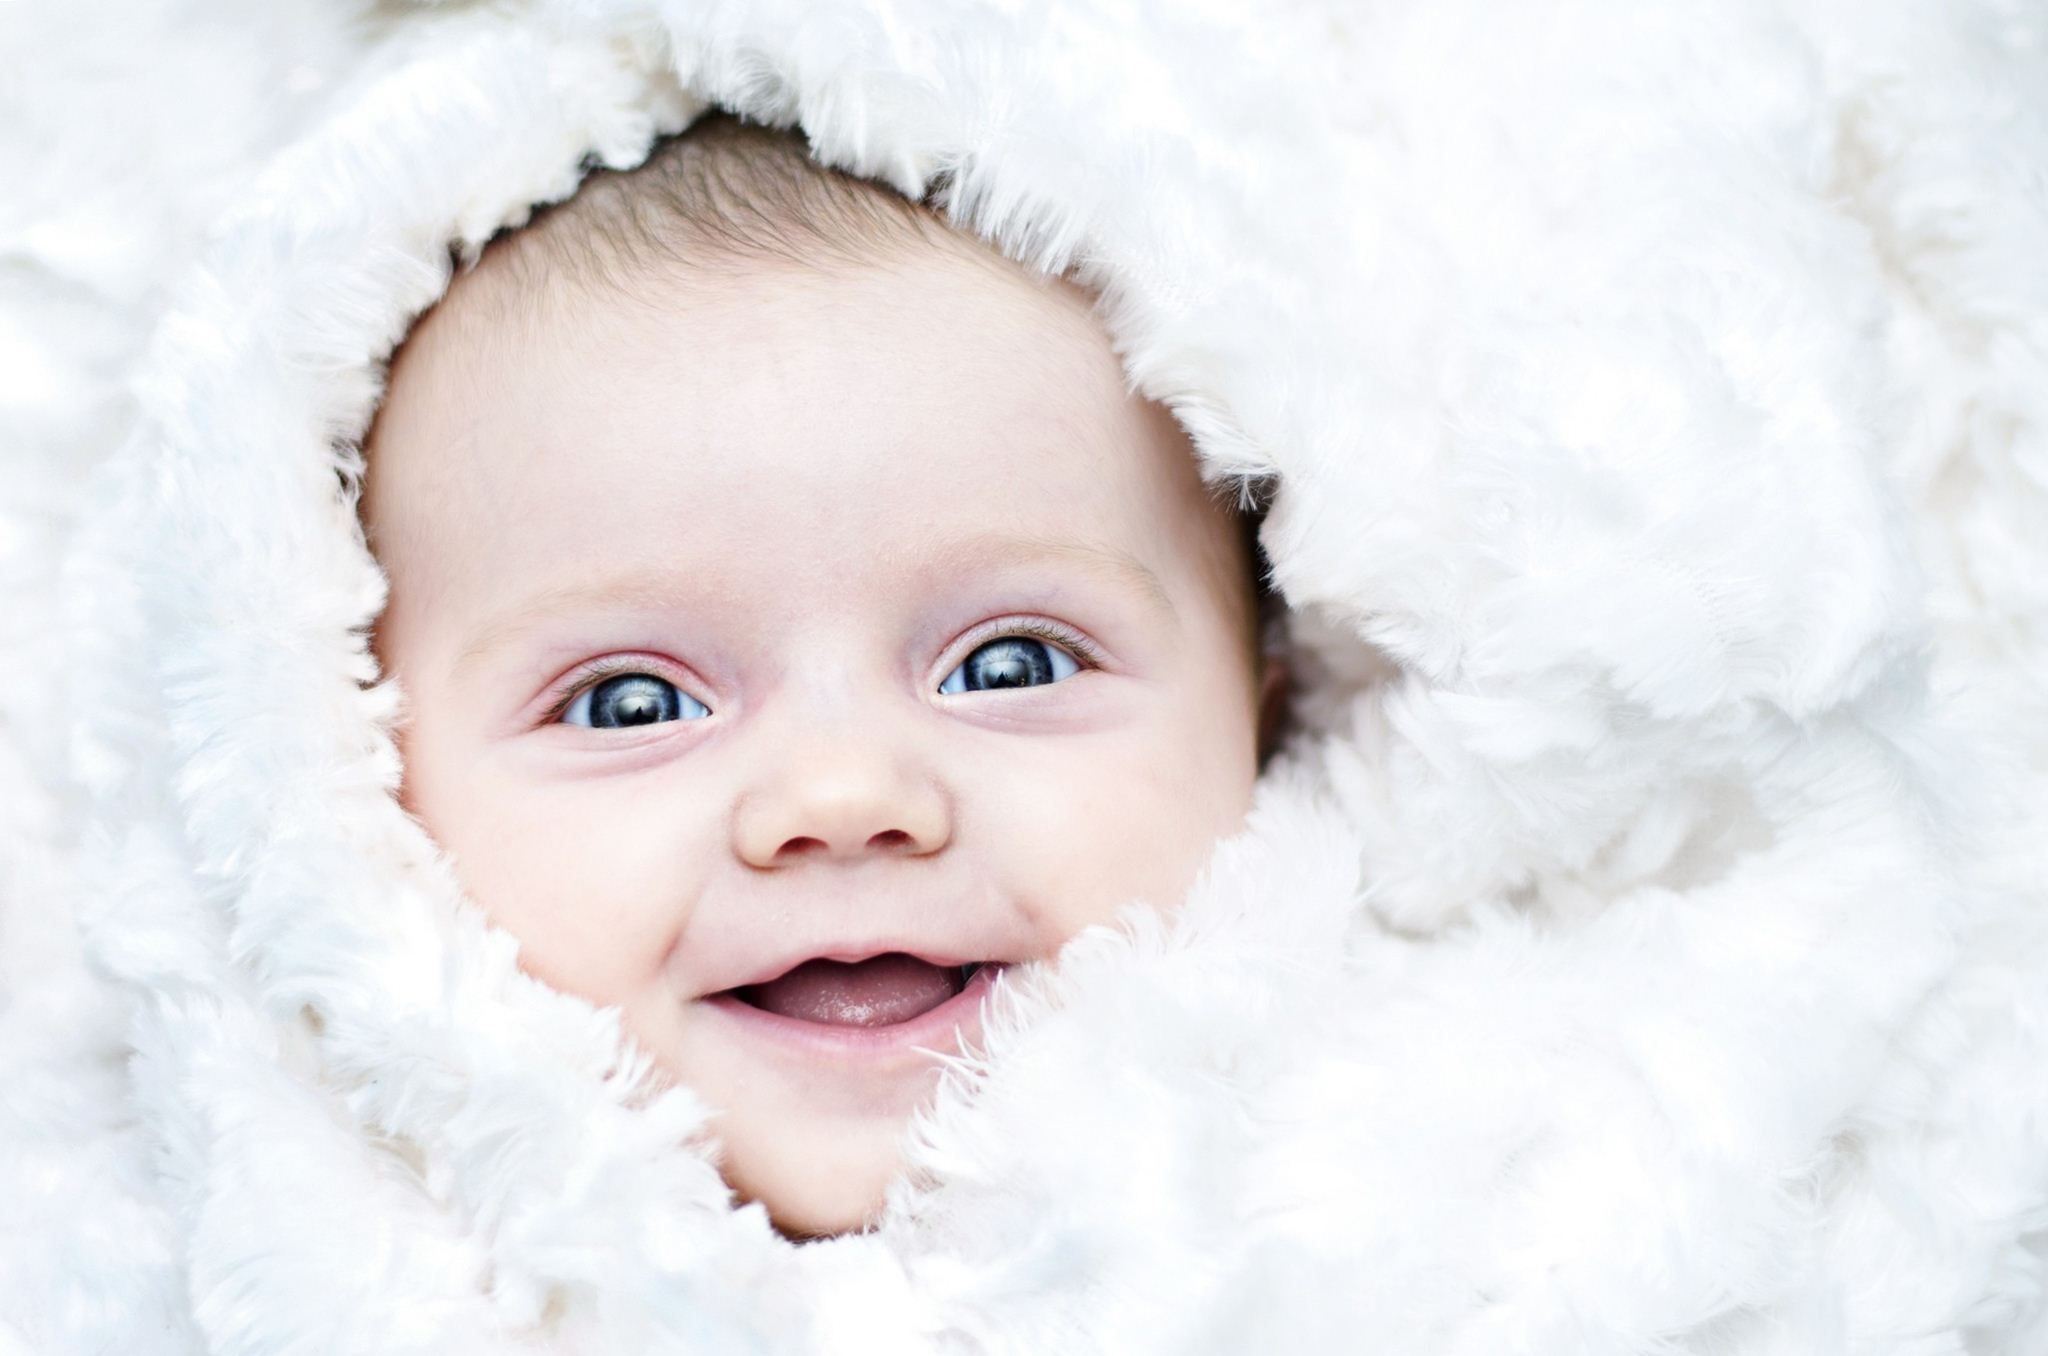 Cute Baby Photo With A Smile HD .vegiediet.blogspot.com